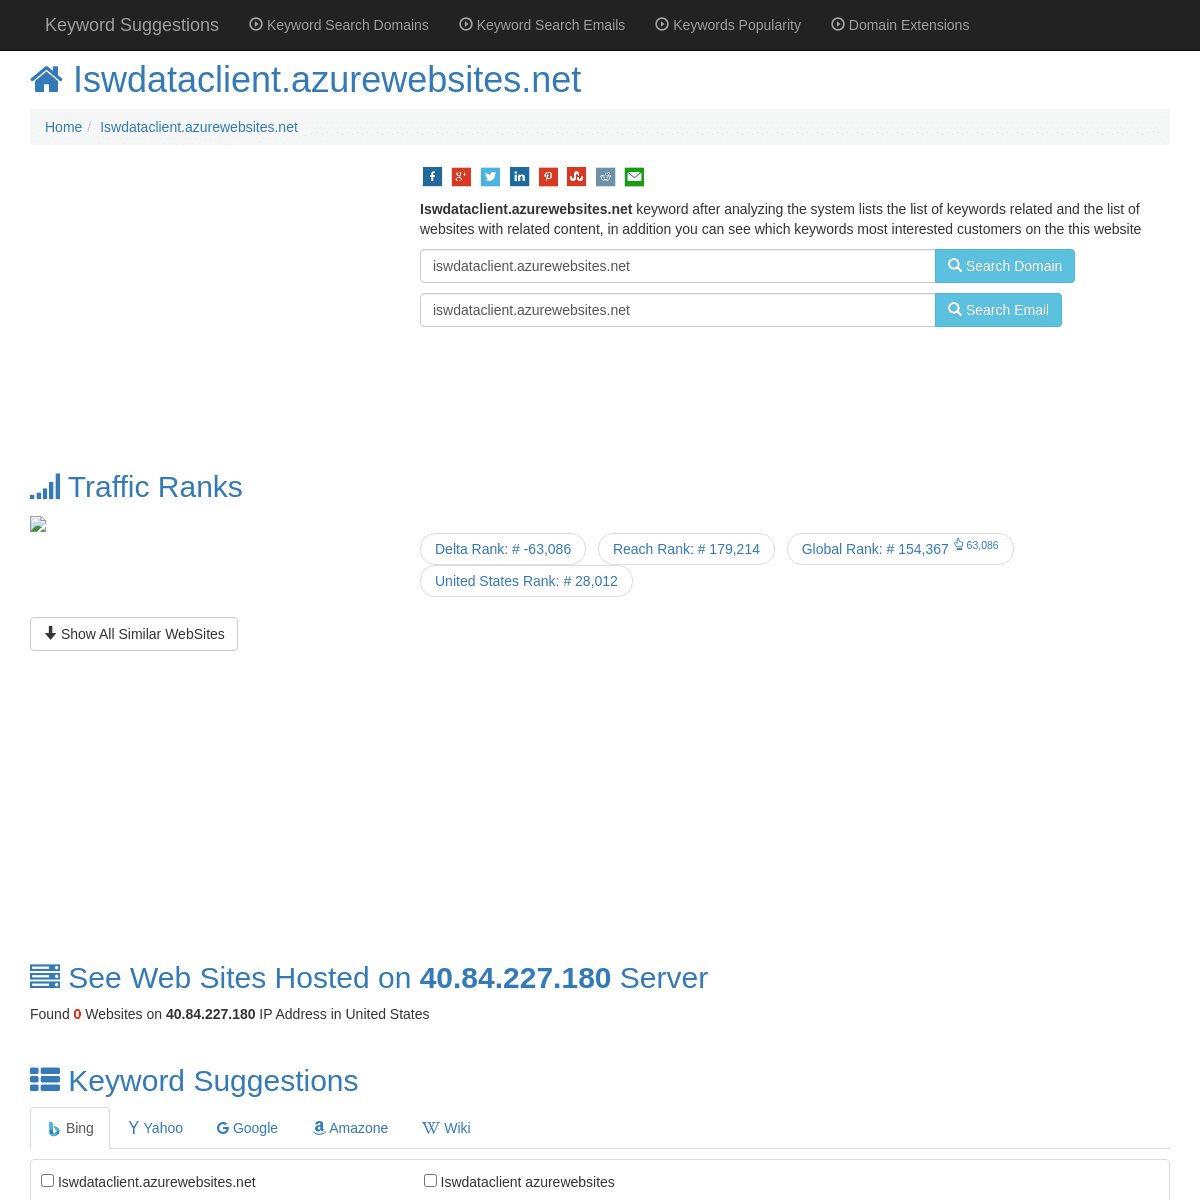 A complete backup of https://www.keyword-suggest-tool.com/search/iswdataclient.azurewebsites.net/